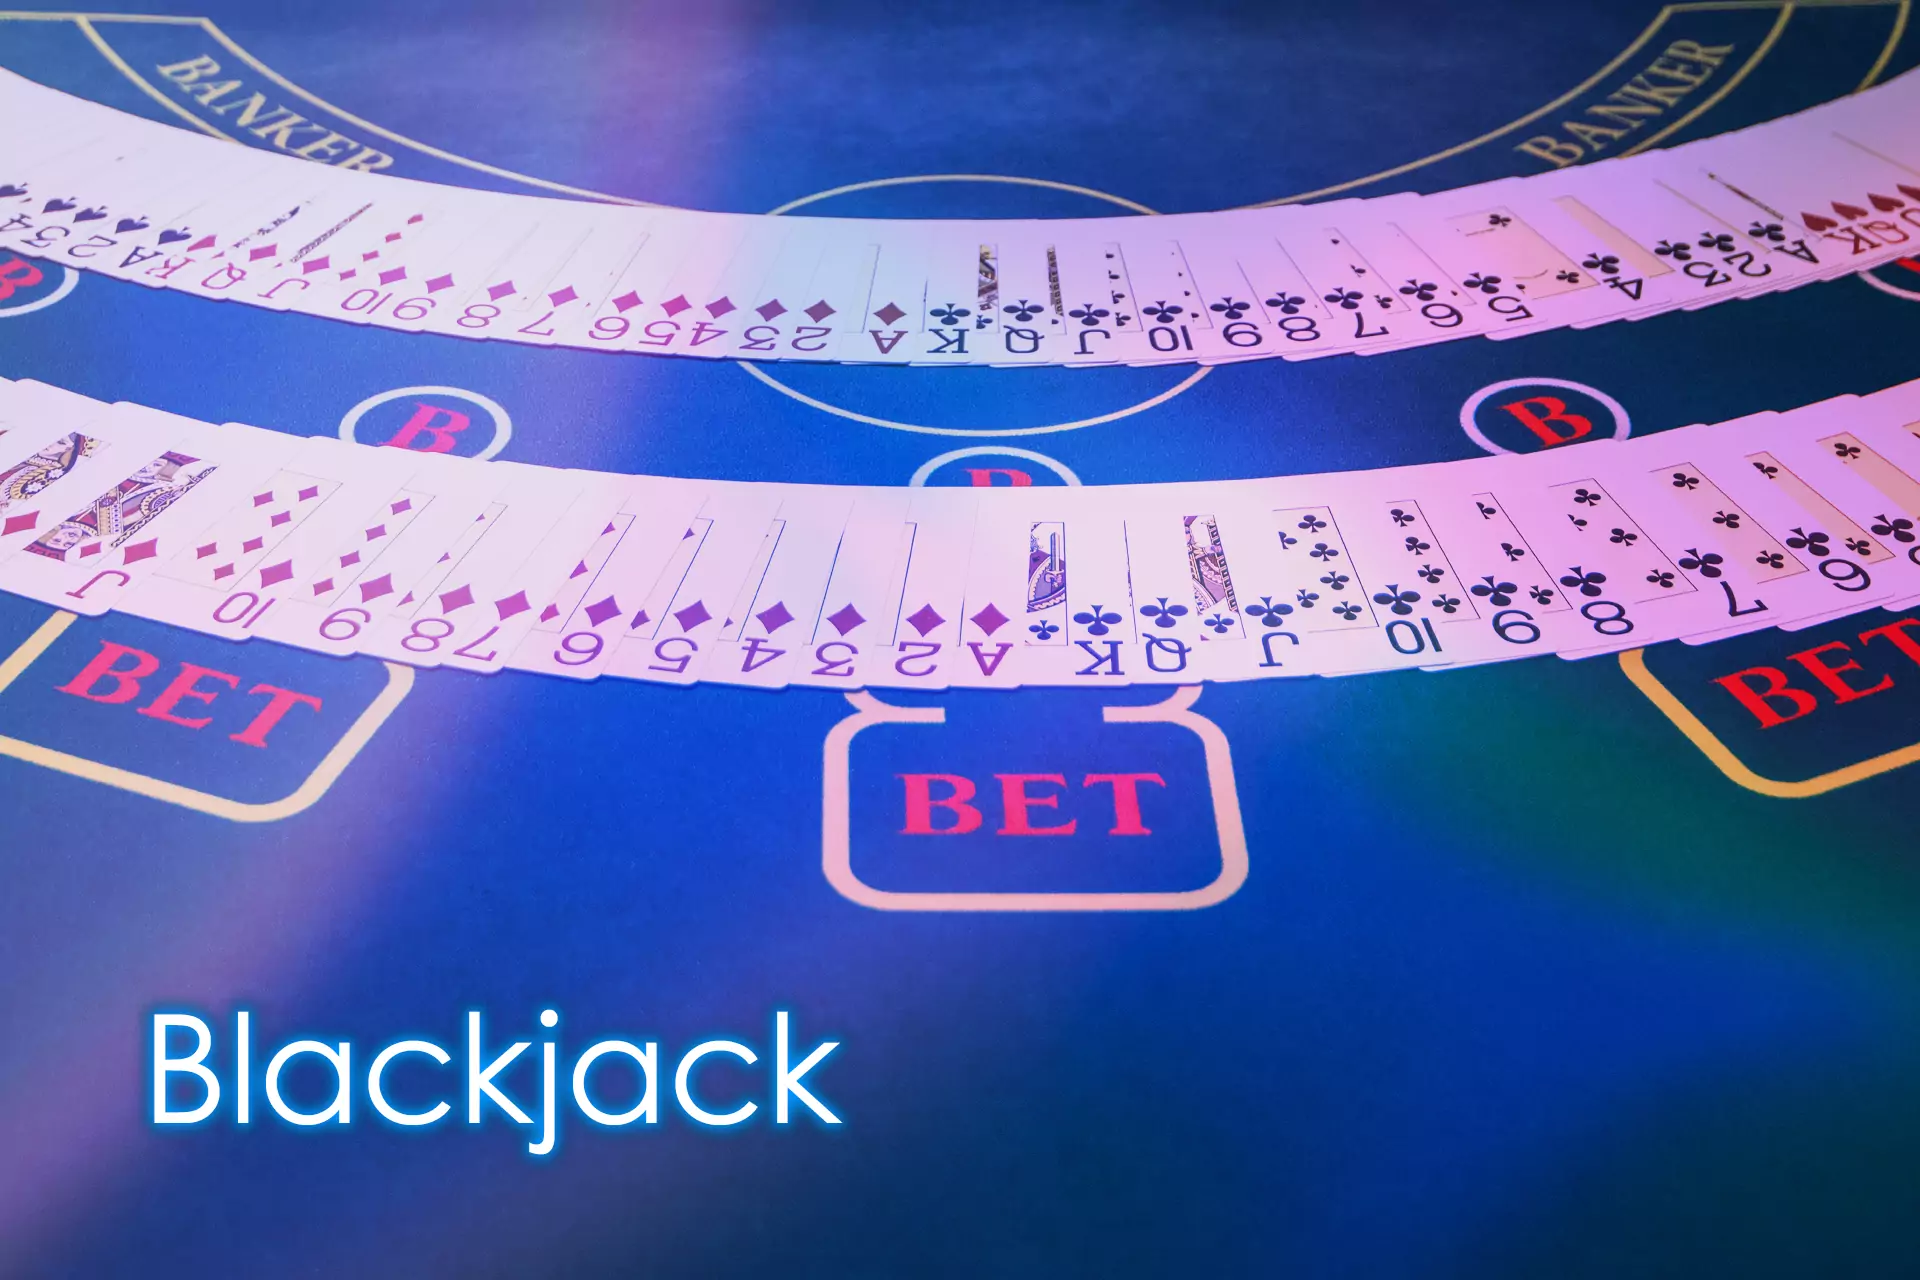 In Blackjack, a player has to beat a dealer to win.